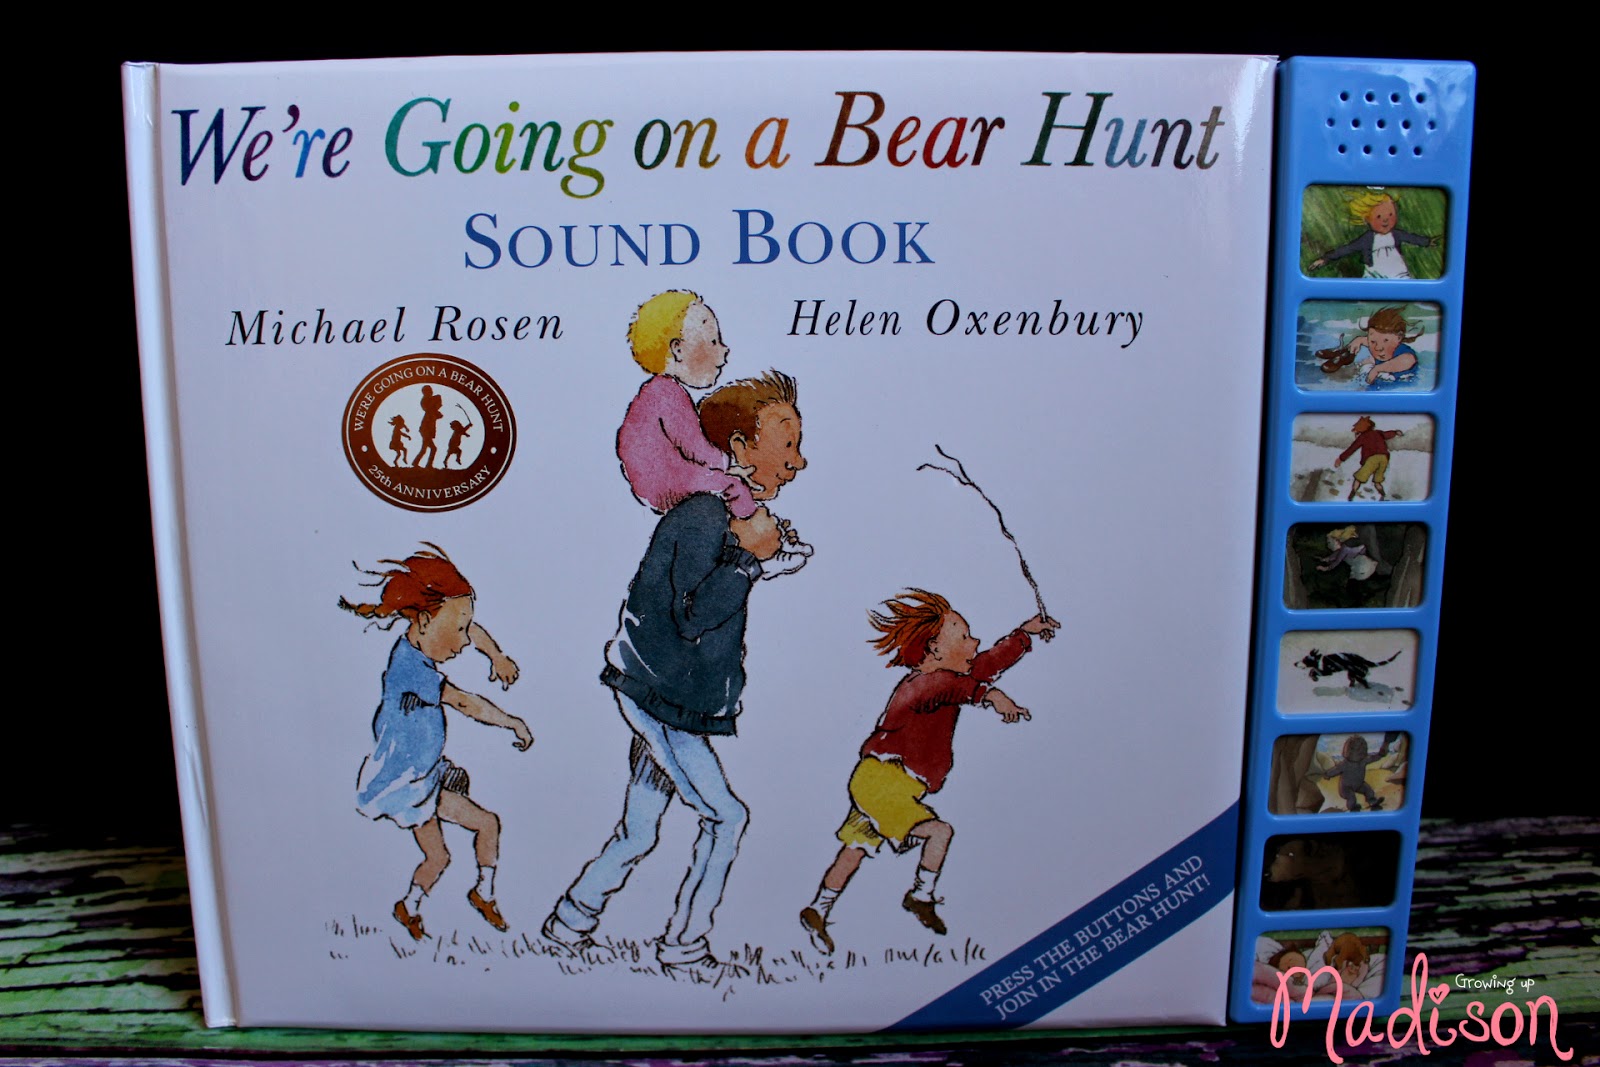 We’re Going on a Bear Hunt Sound Book